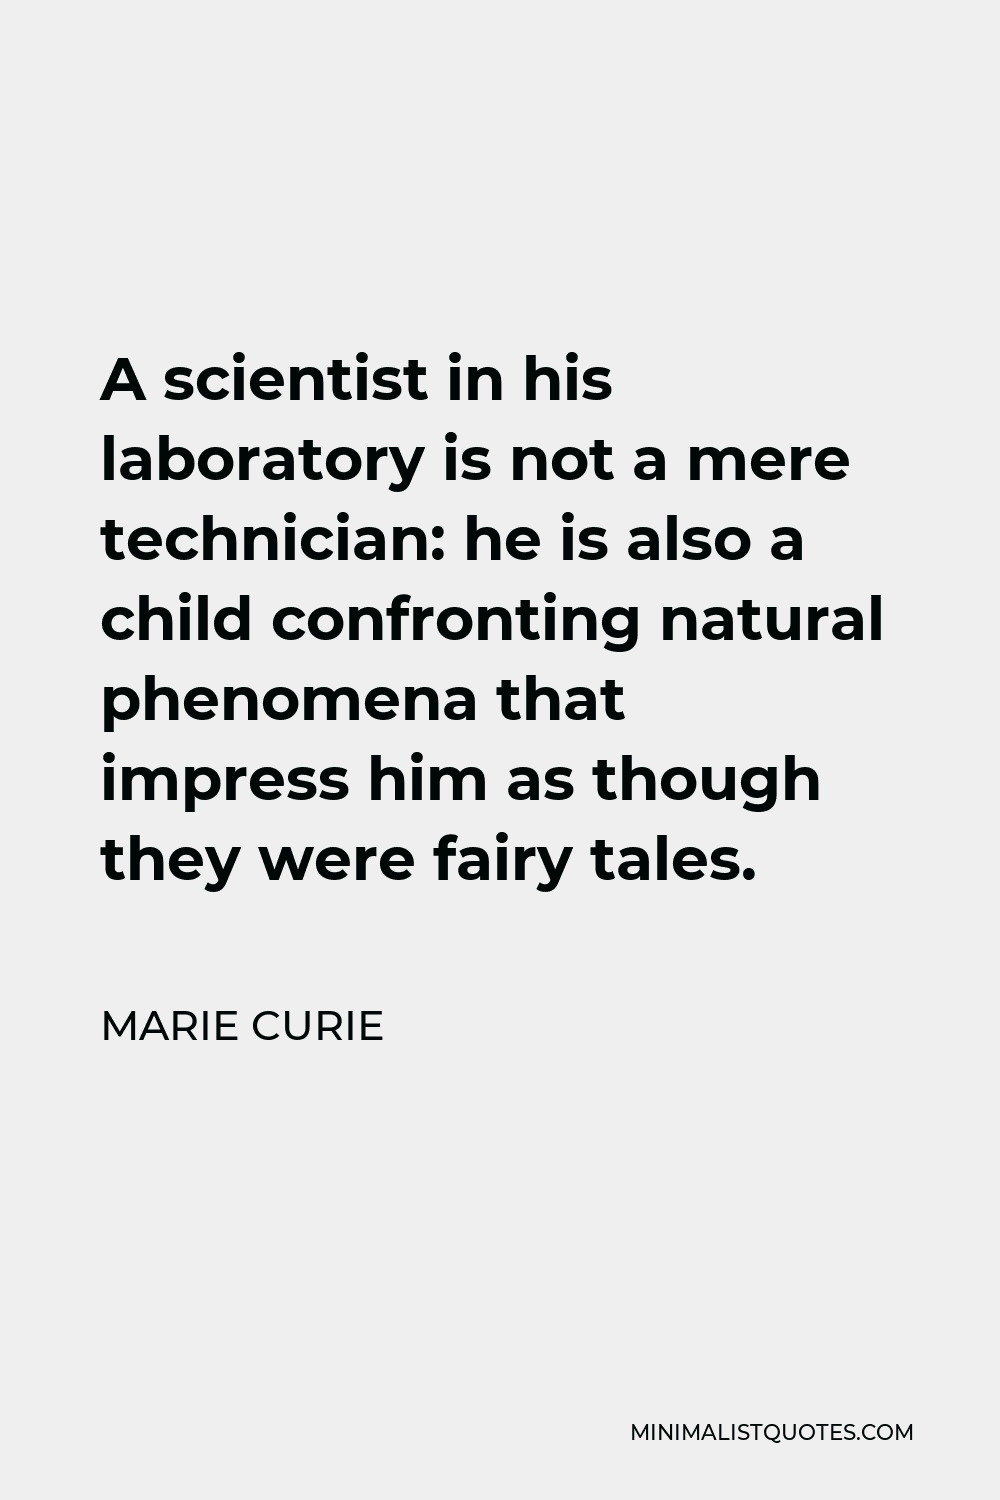 Marie Curie Quote - A scientist in his laboratory is not a mere technician: he is also a child confronting natural phenomena that impress him as though they were fairy tales.